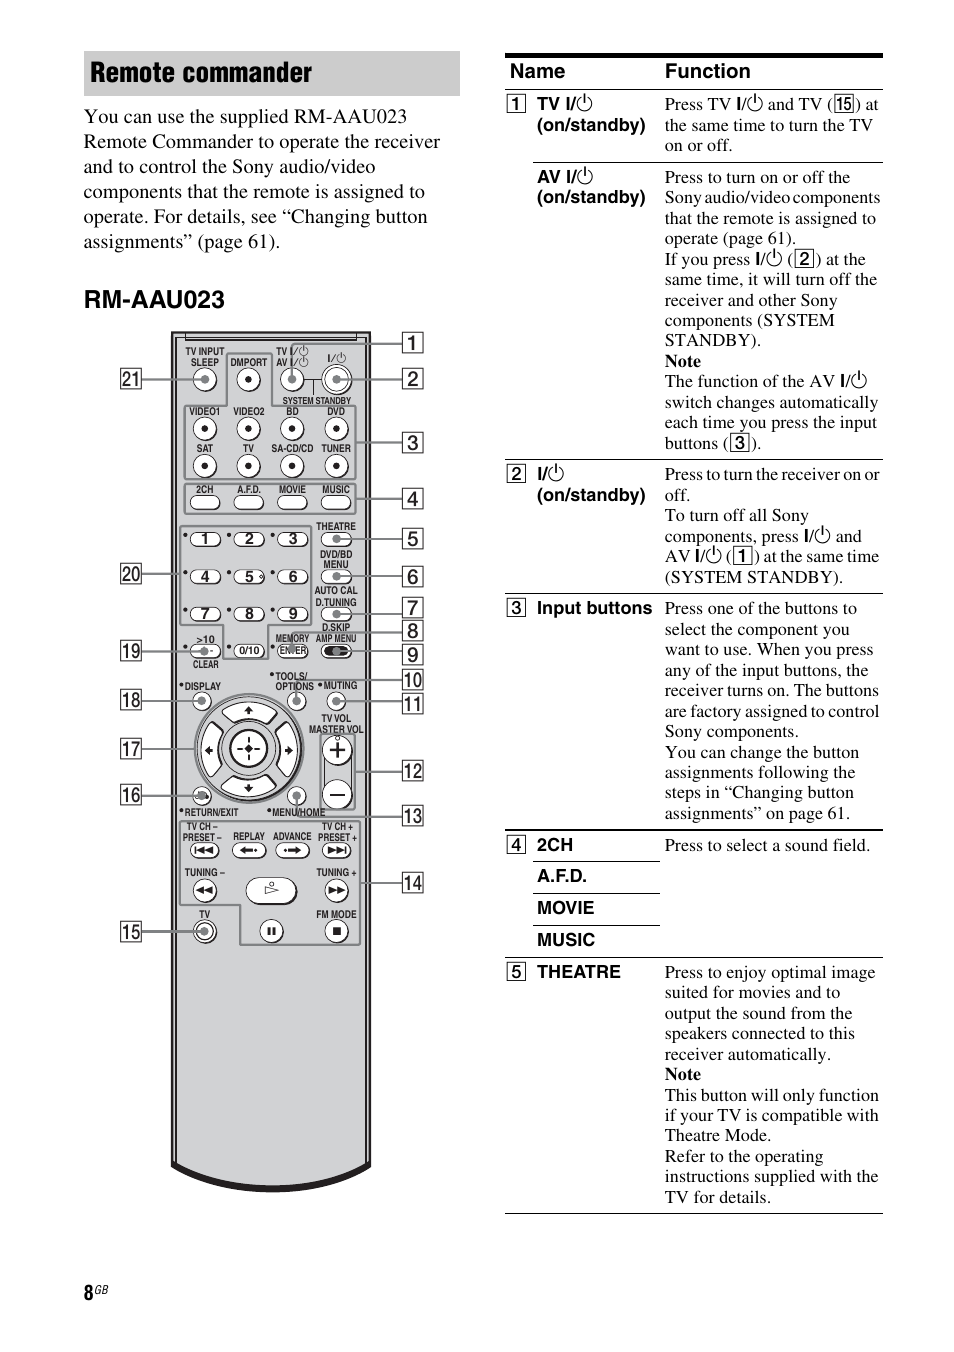 Remote commander, Rm-aau023, Name function | Sony 3-295-946-12(1) User